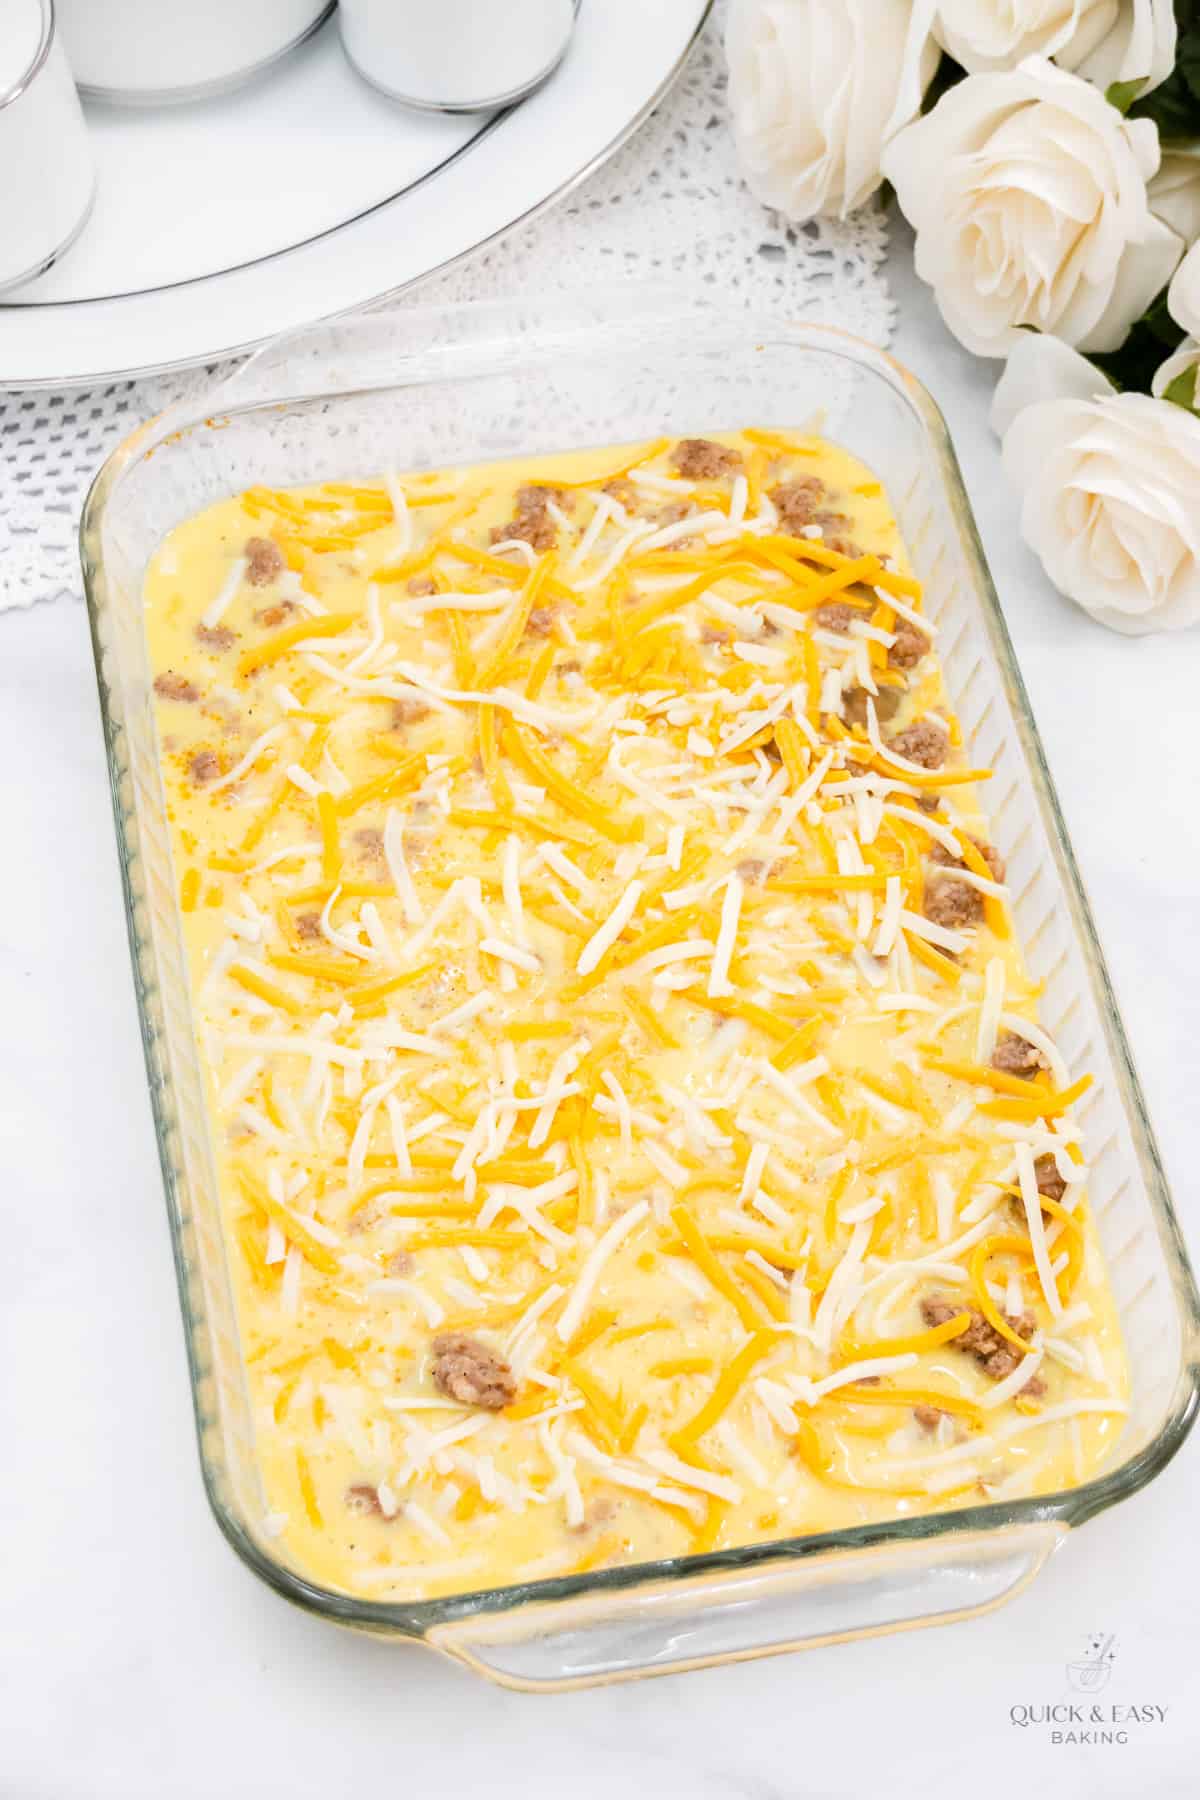 Egg casserole with sausage mixture in a casserole dish.